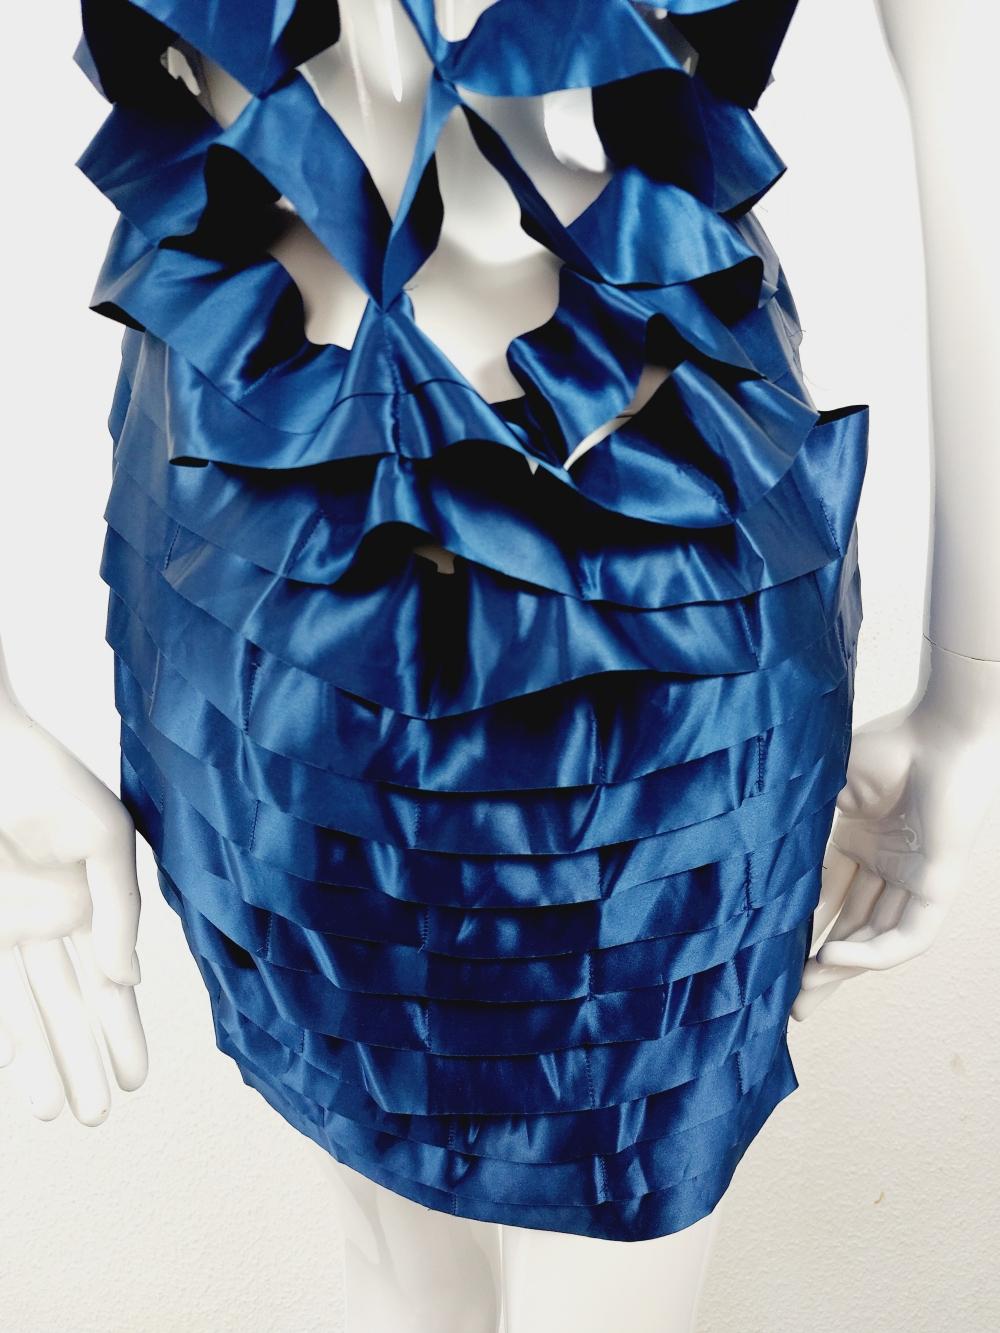 Issey Miyake Sapphire Japanese Blue Satin Ribbon Cage Dress, 1990s For Sale 4